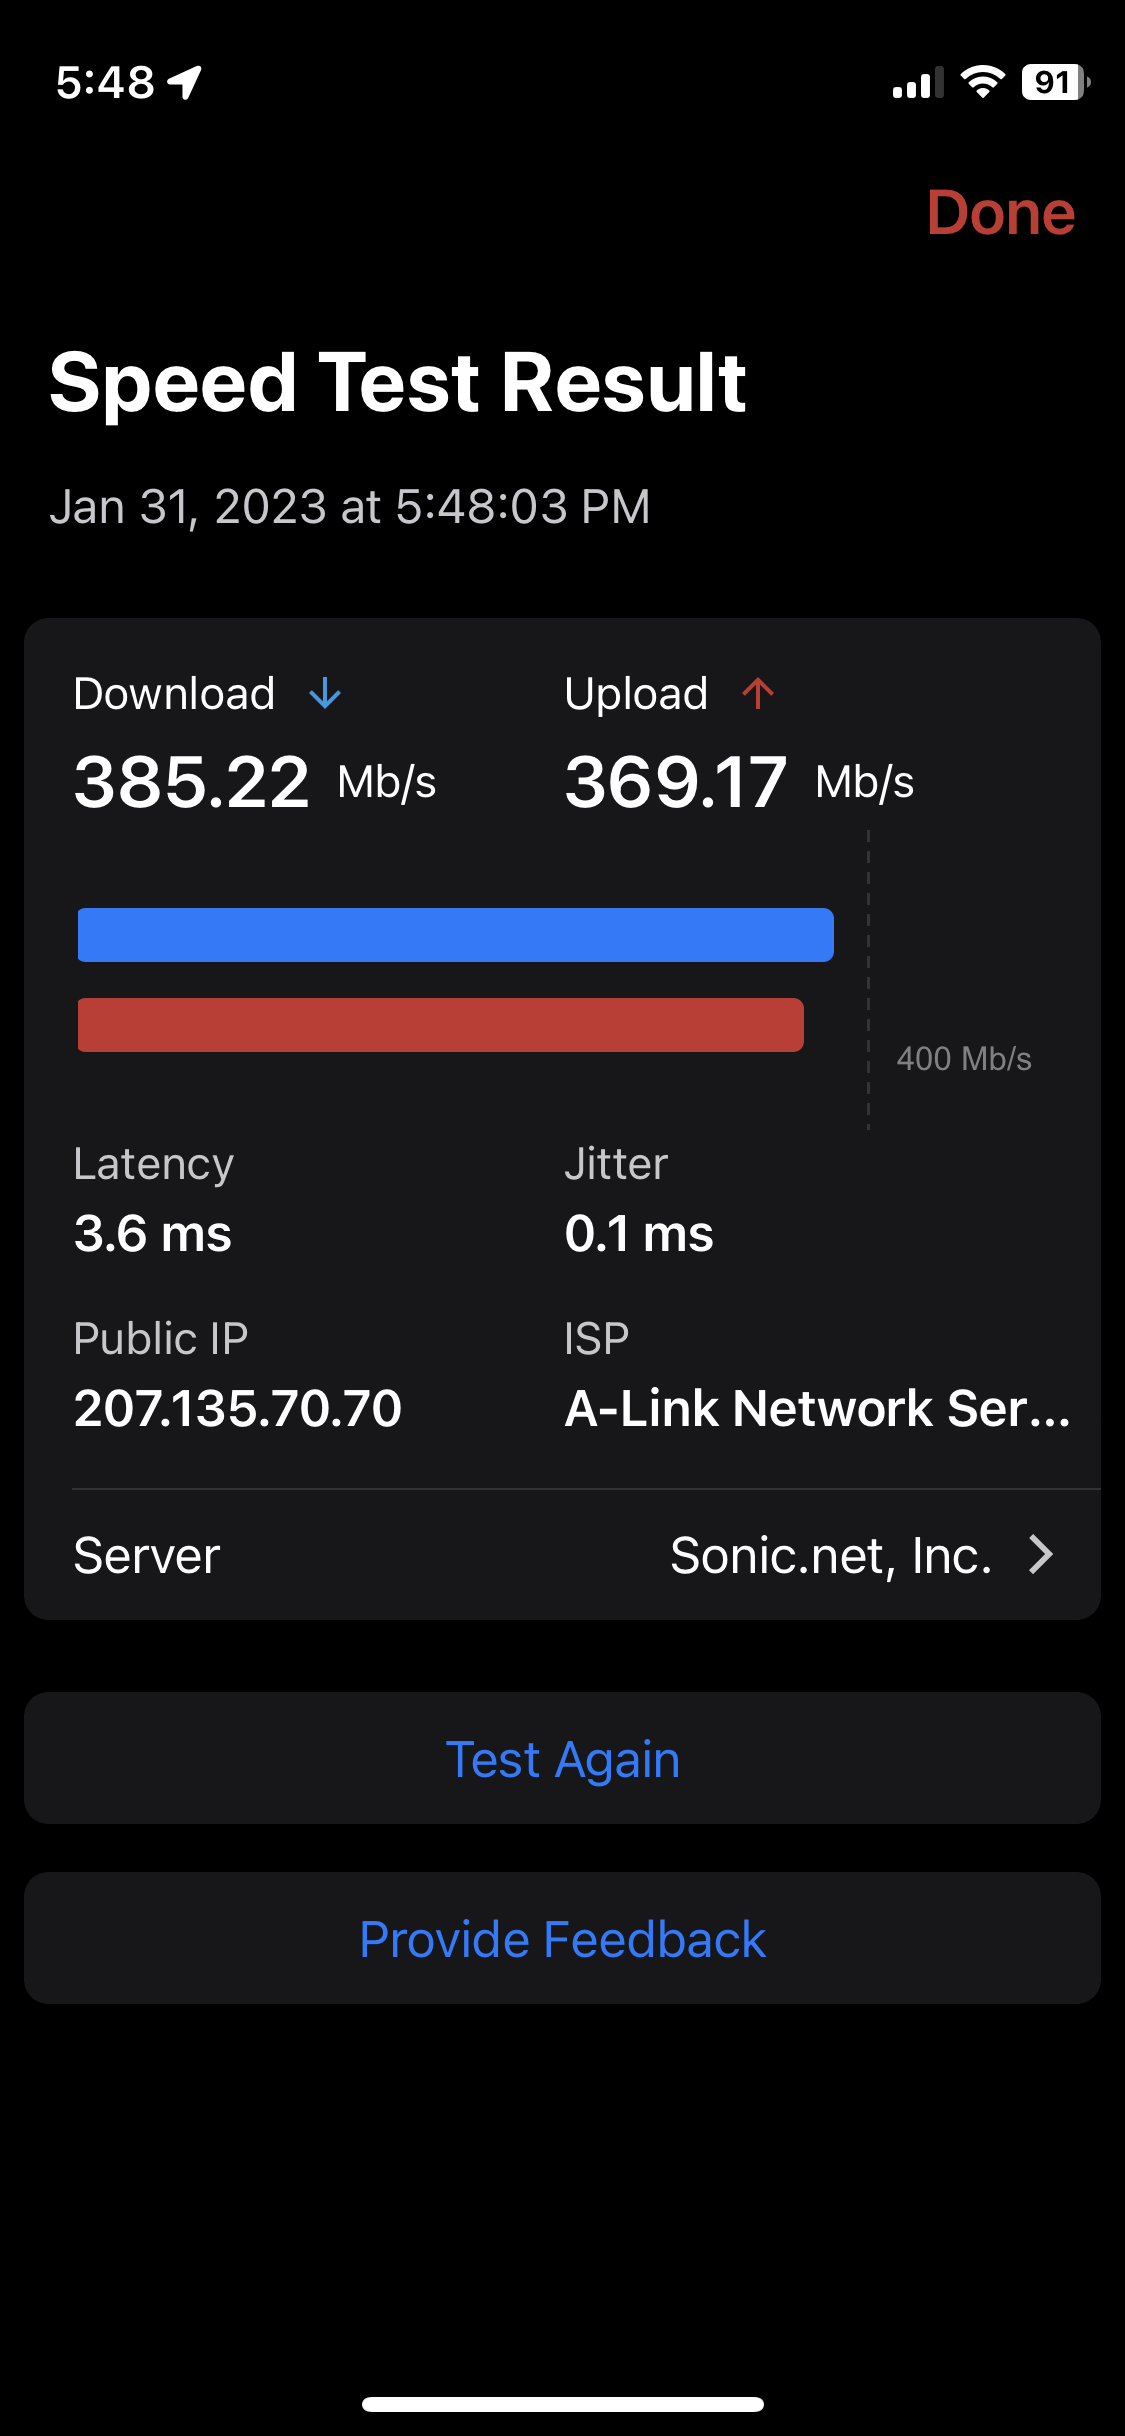 WAN speed test can be conducted in the Firewalla mobile app